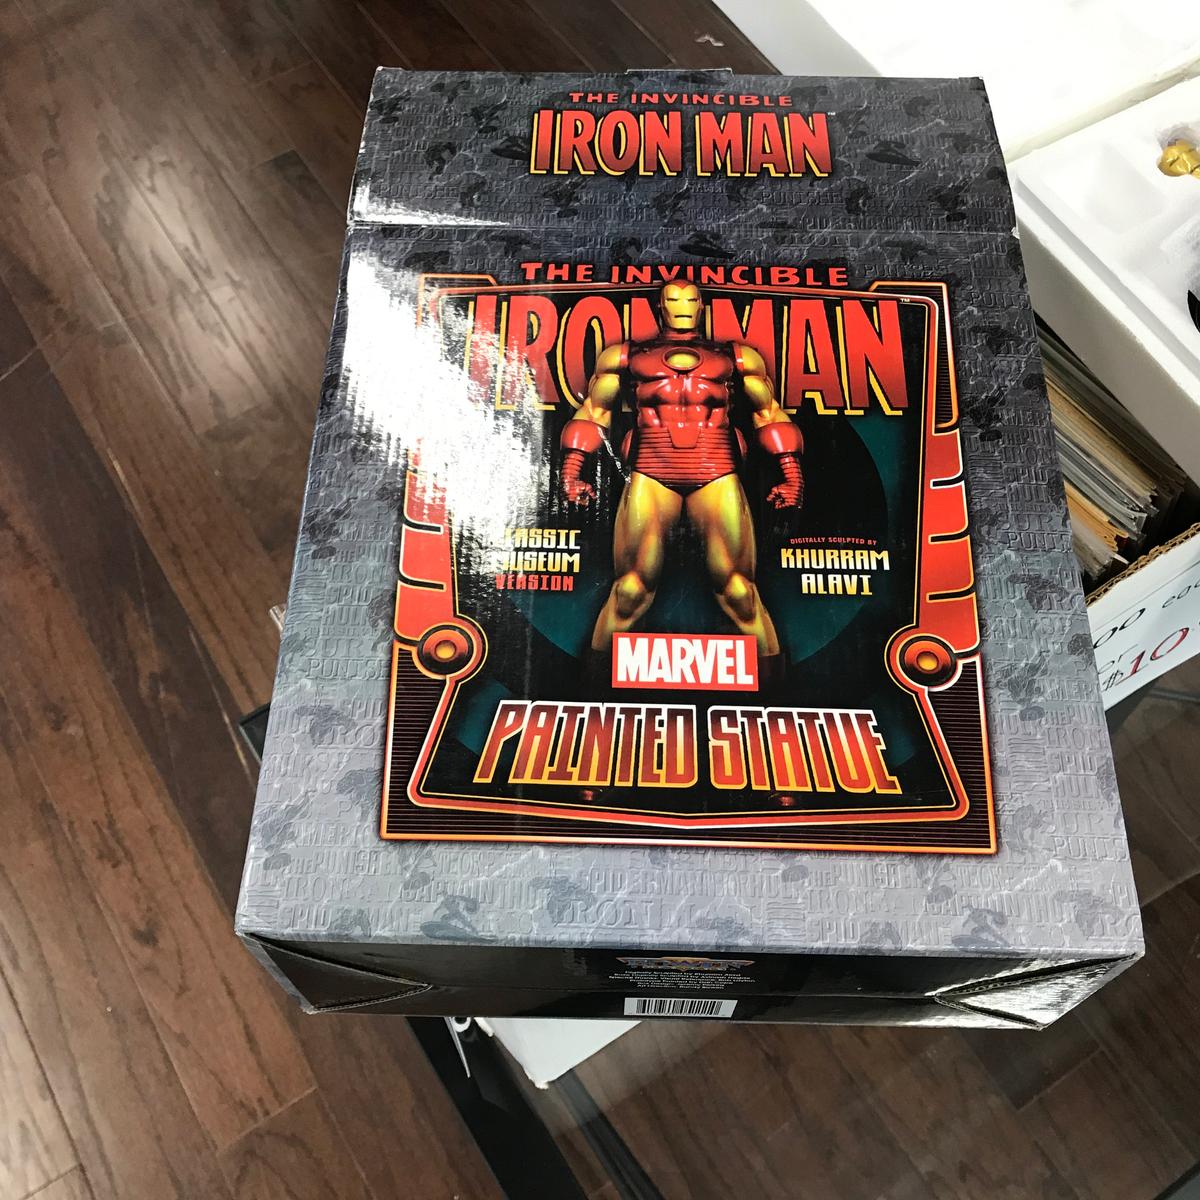 Iron Man Bowen Limited Edition Statue - Never displayed!  MINT!